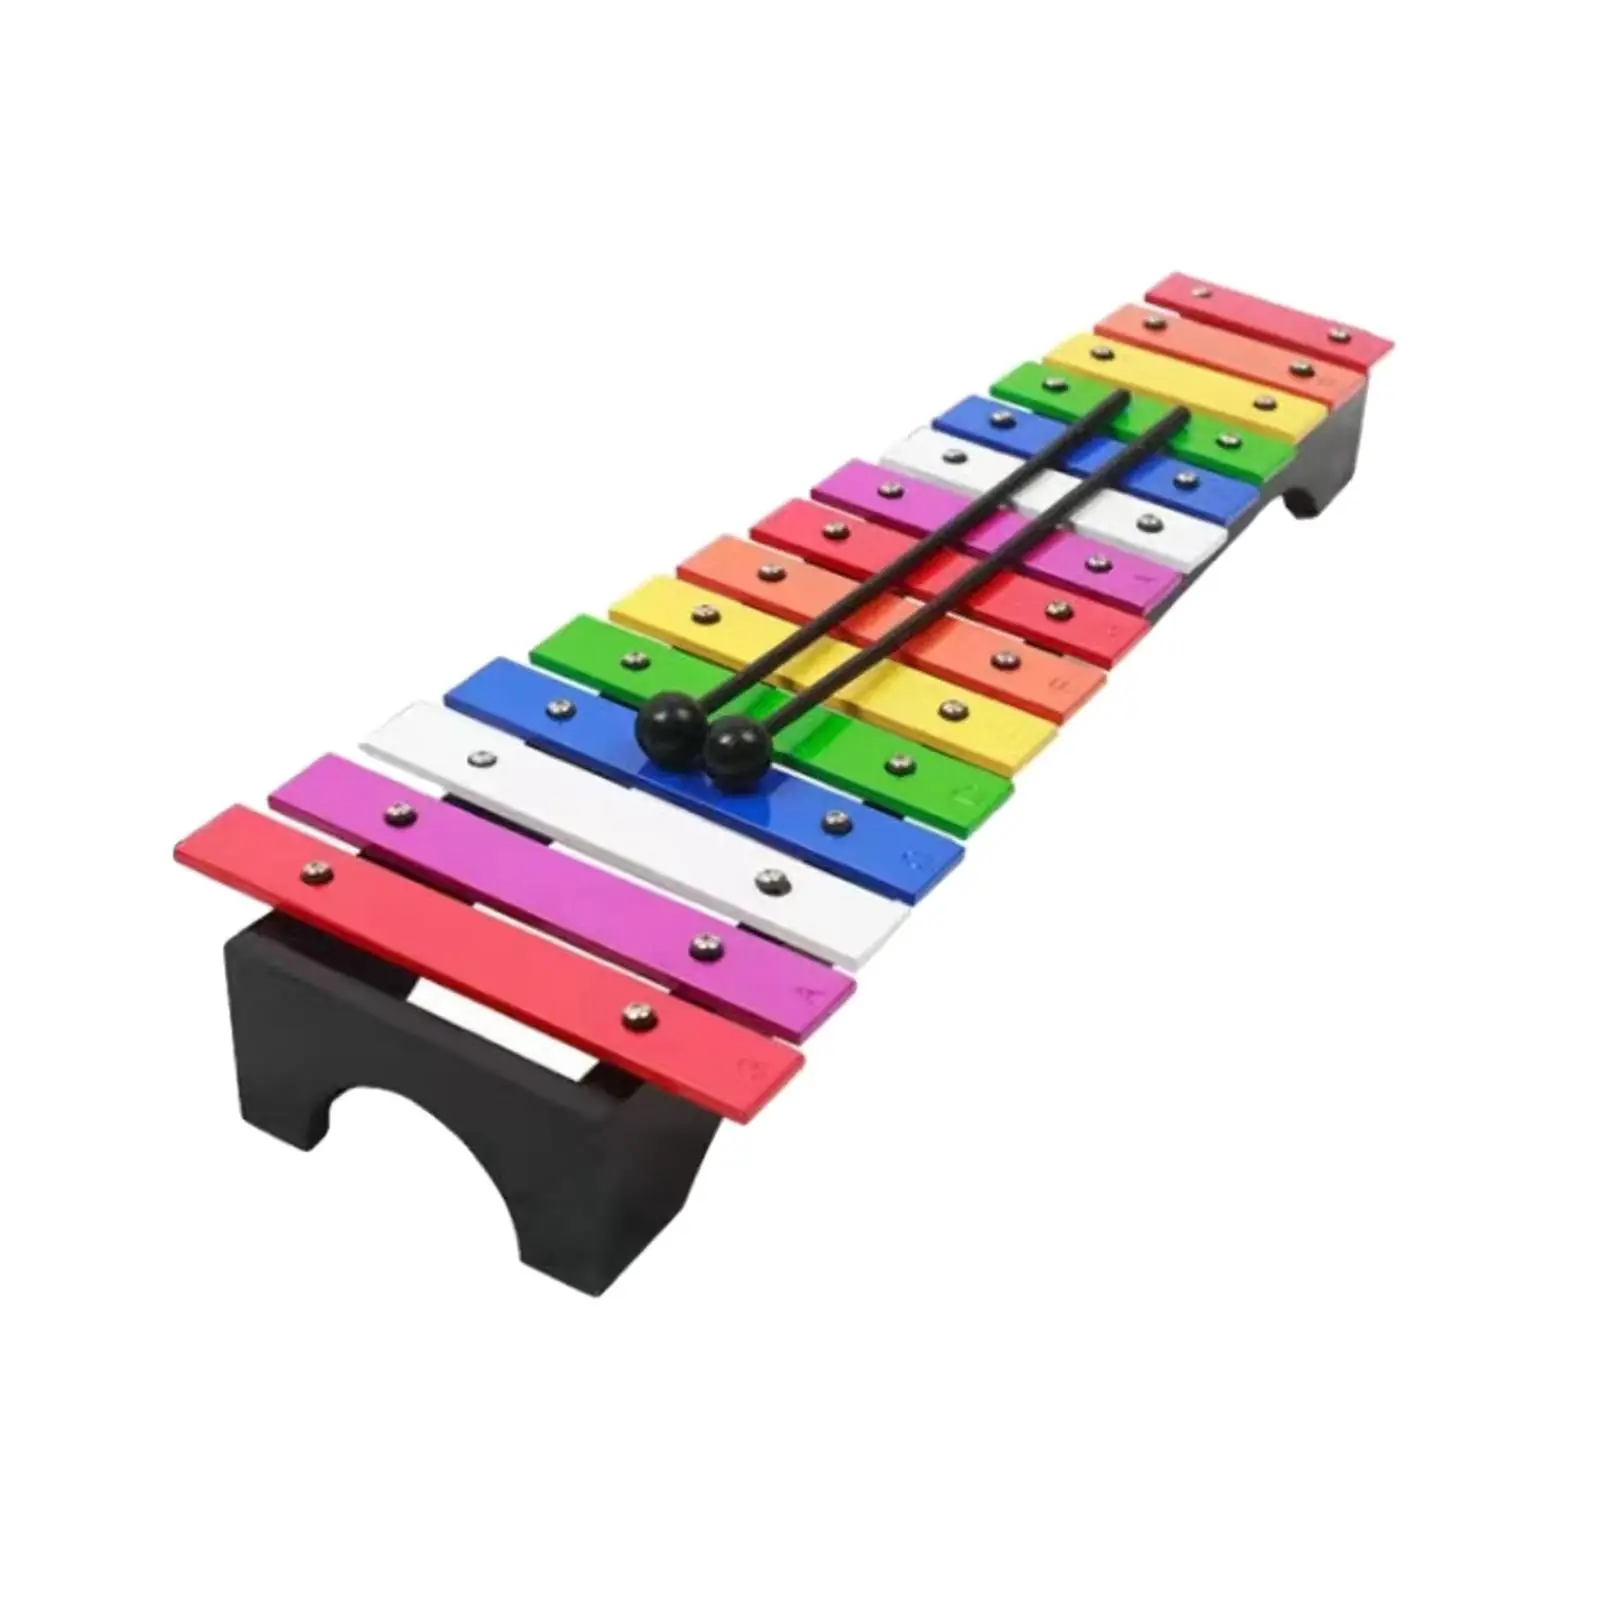 15 Note Metal Xylophone Metal Hand Percussion Hand Knock Piano Toy for Family Sessions Event Outside School Orchestras Concert